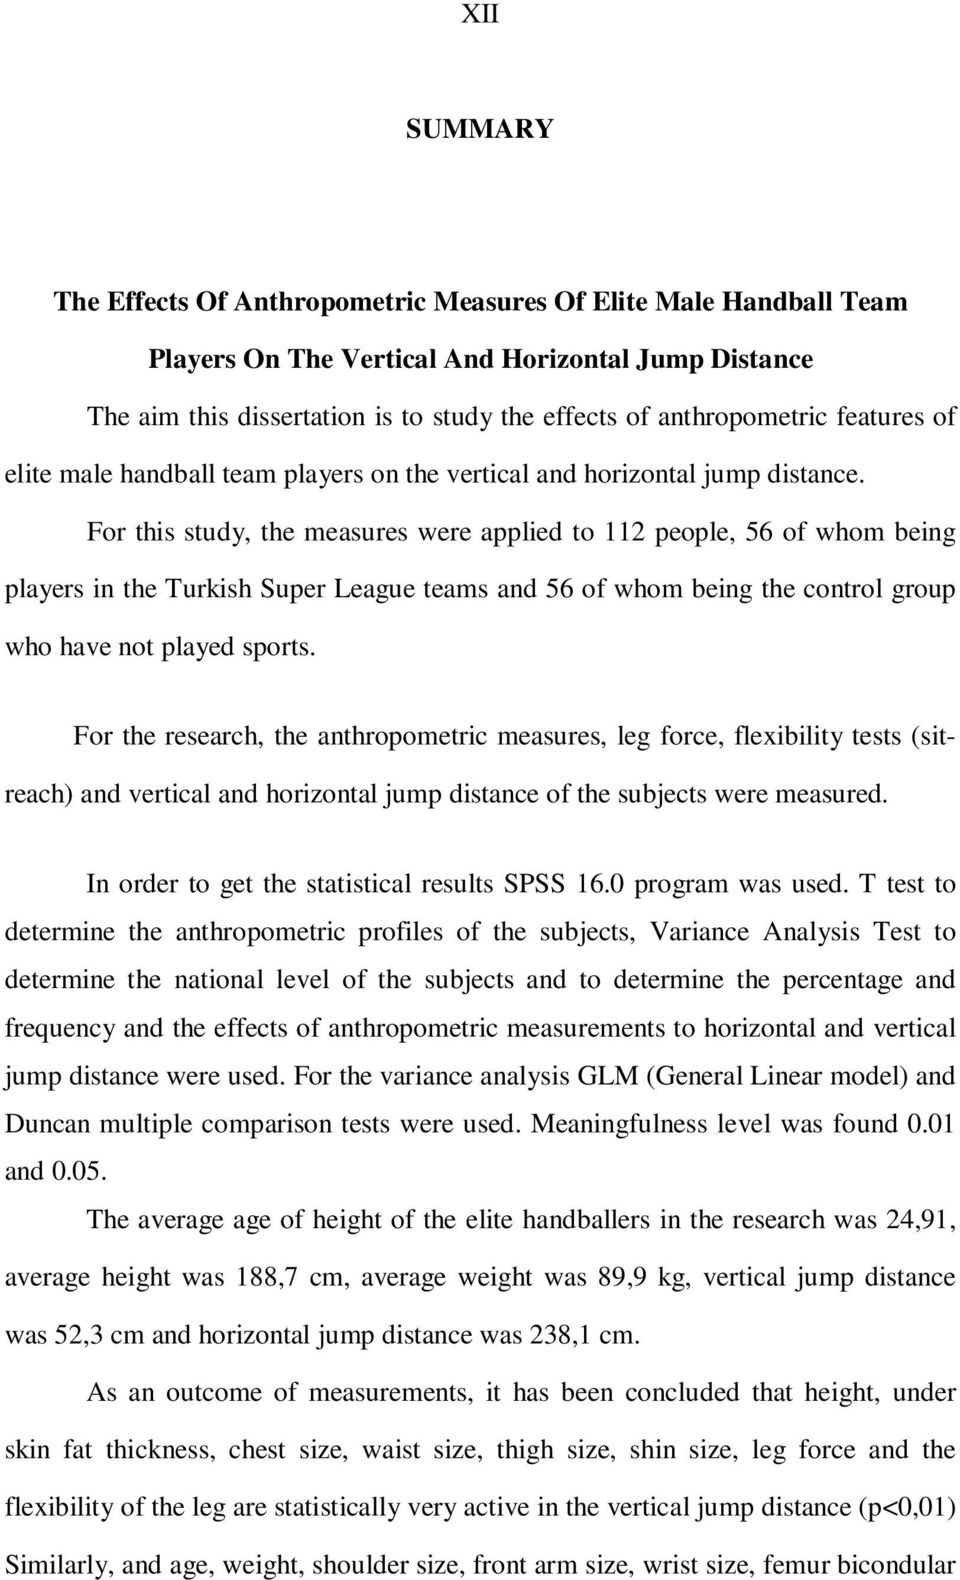 For this study, the measures were applied to 112 people, 56 of whom being players in the Turkish Super League teams and 56 of whom being the control group who have not played sports.